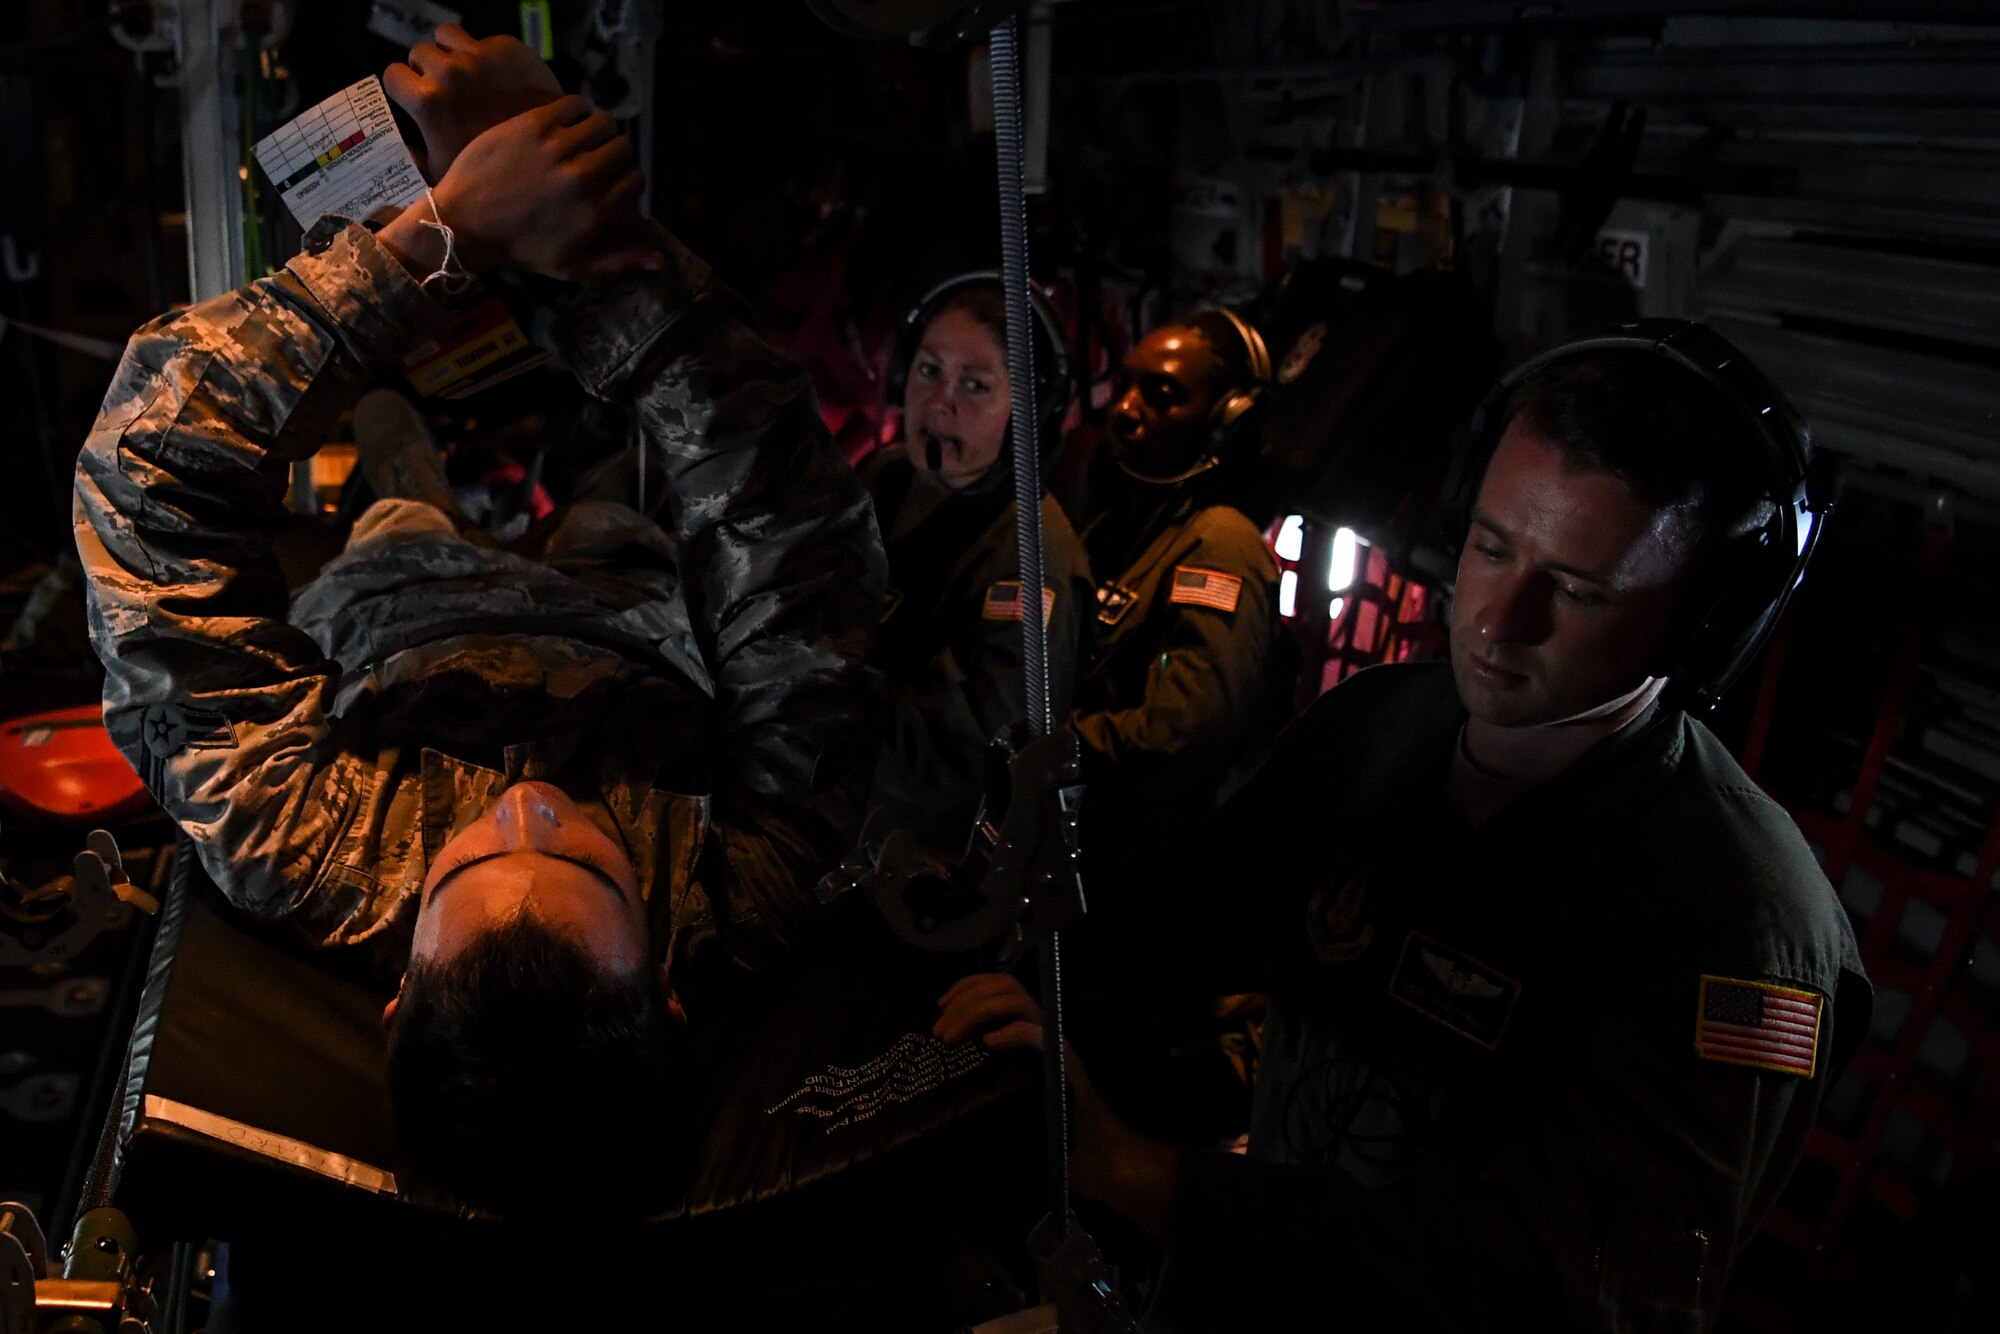 (Right) U.S. Air Force Staff Sgt. David Francis, 349th Aeromedical Evacuation Squadron technician, treats a simulated patient during an aeromedical mission over Rota, U.S. Commonwealth of the Northern Mariana Islands, during exercise COPE NORTH 18, Feb. 19.